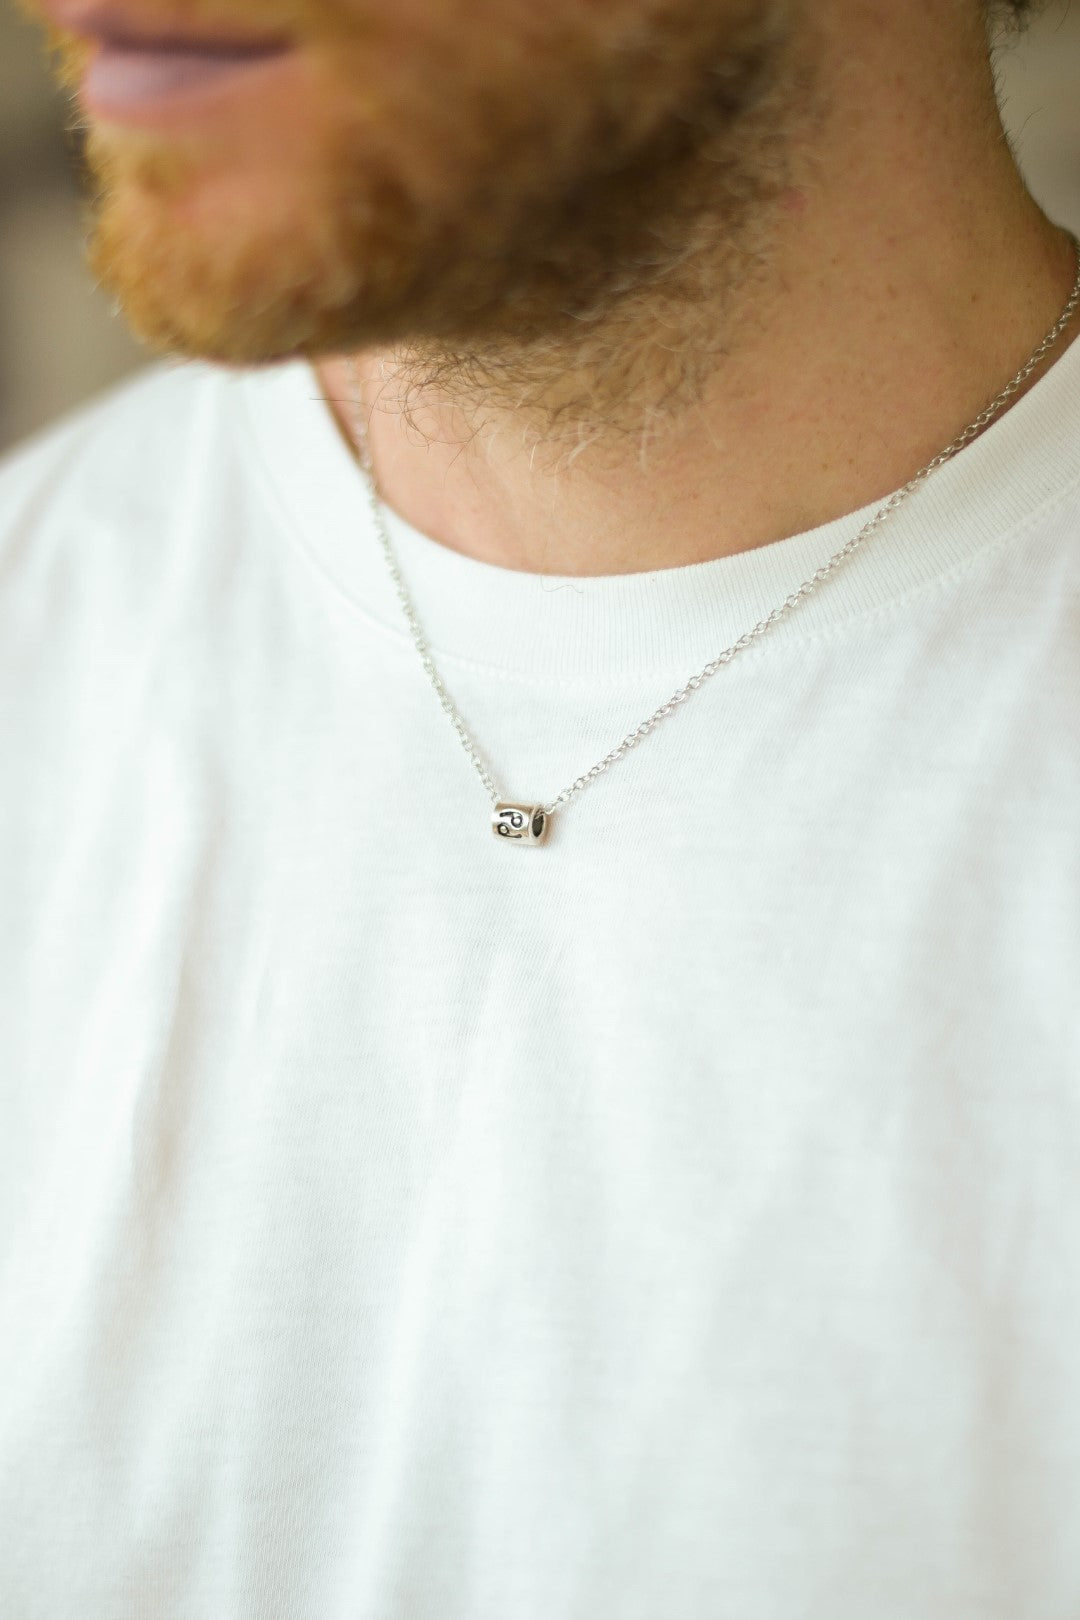 Men's Oxidised Sterling Silver Initial Necklace | Posh Totty Designs | Wolf  & Badger